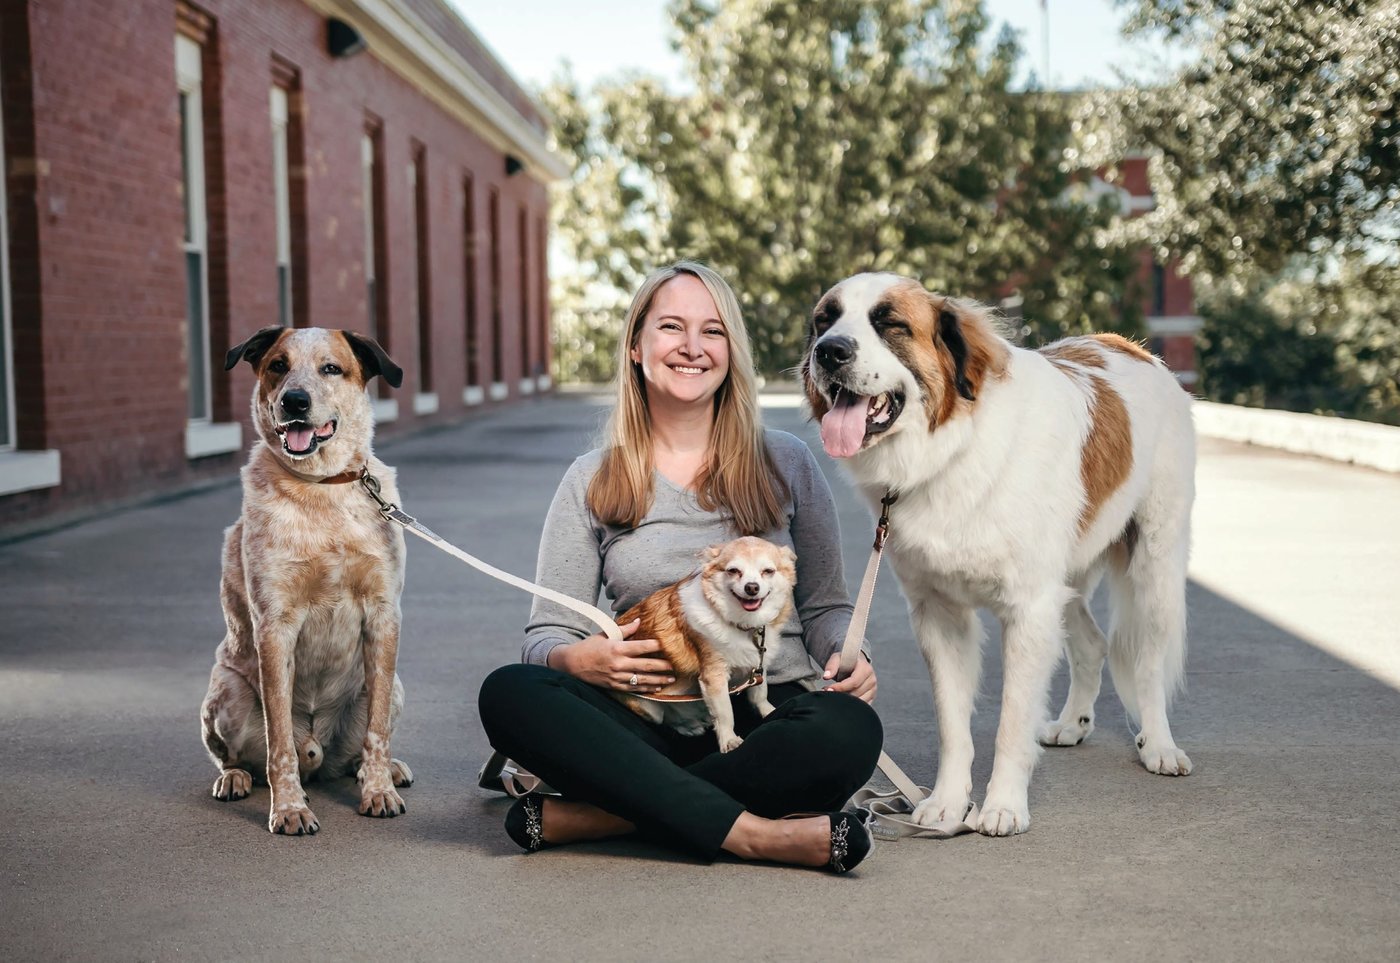 Power player Grace Cook poses for a sweet snap with pups Teddy, Rocky and Zeus. PHOTO BY ROBERT GUERRA